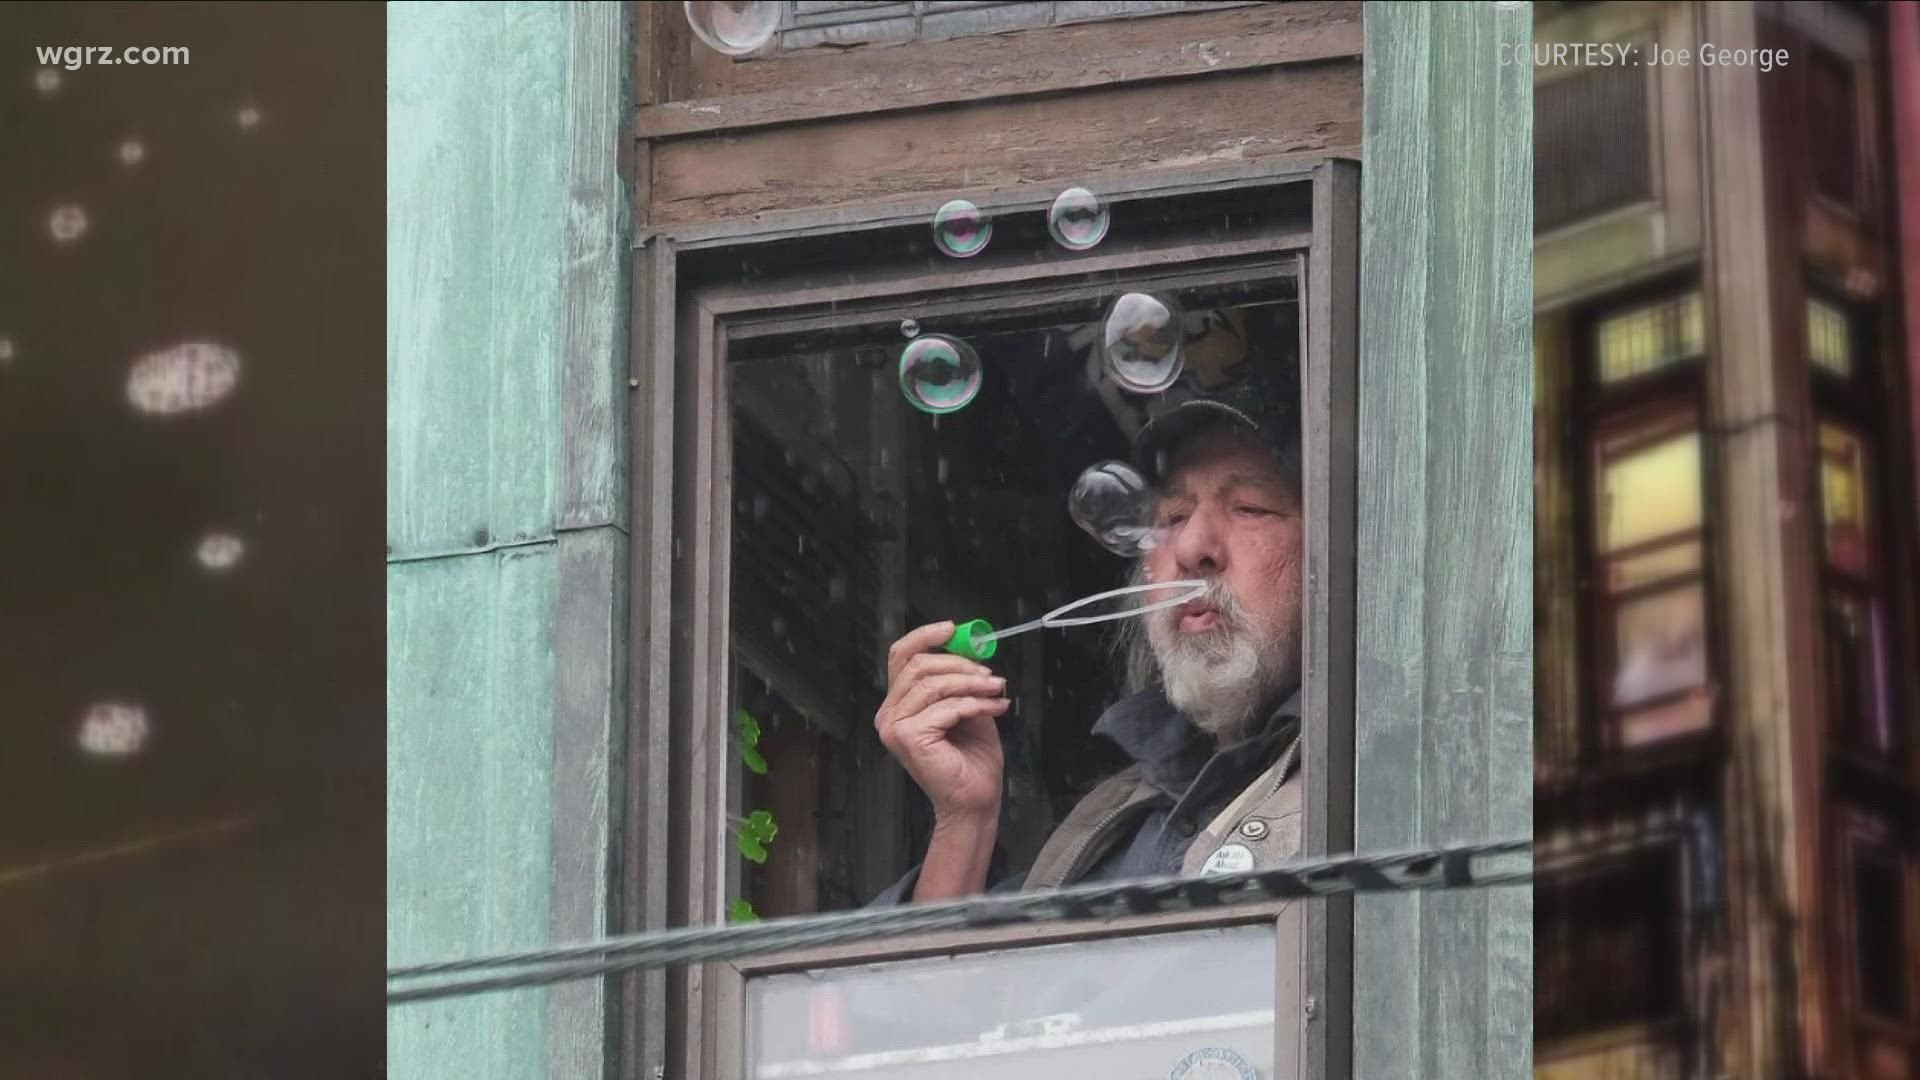 Chuck Incorvaia was an icon in downtown Buffalo and known for spreading joy to many in the Allentown area with the magic of bubble blowing. He was 75 years old.